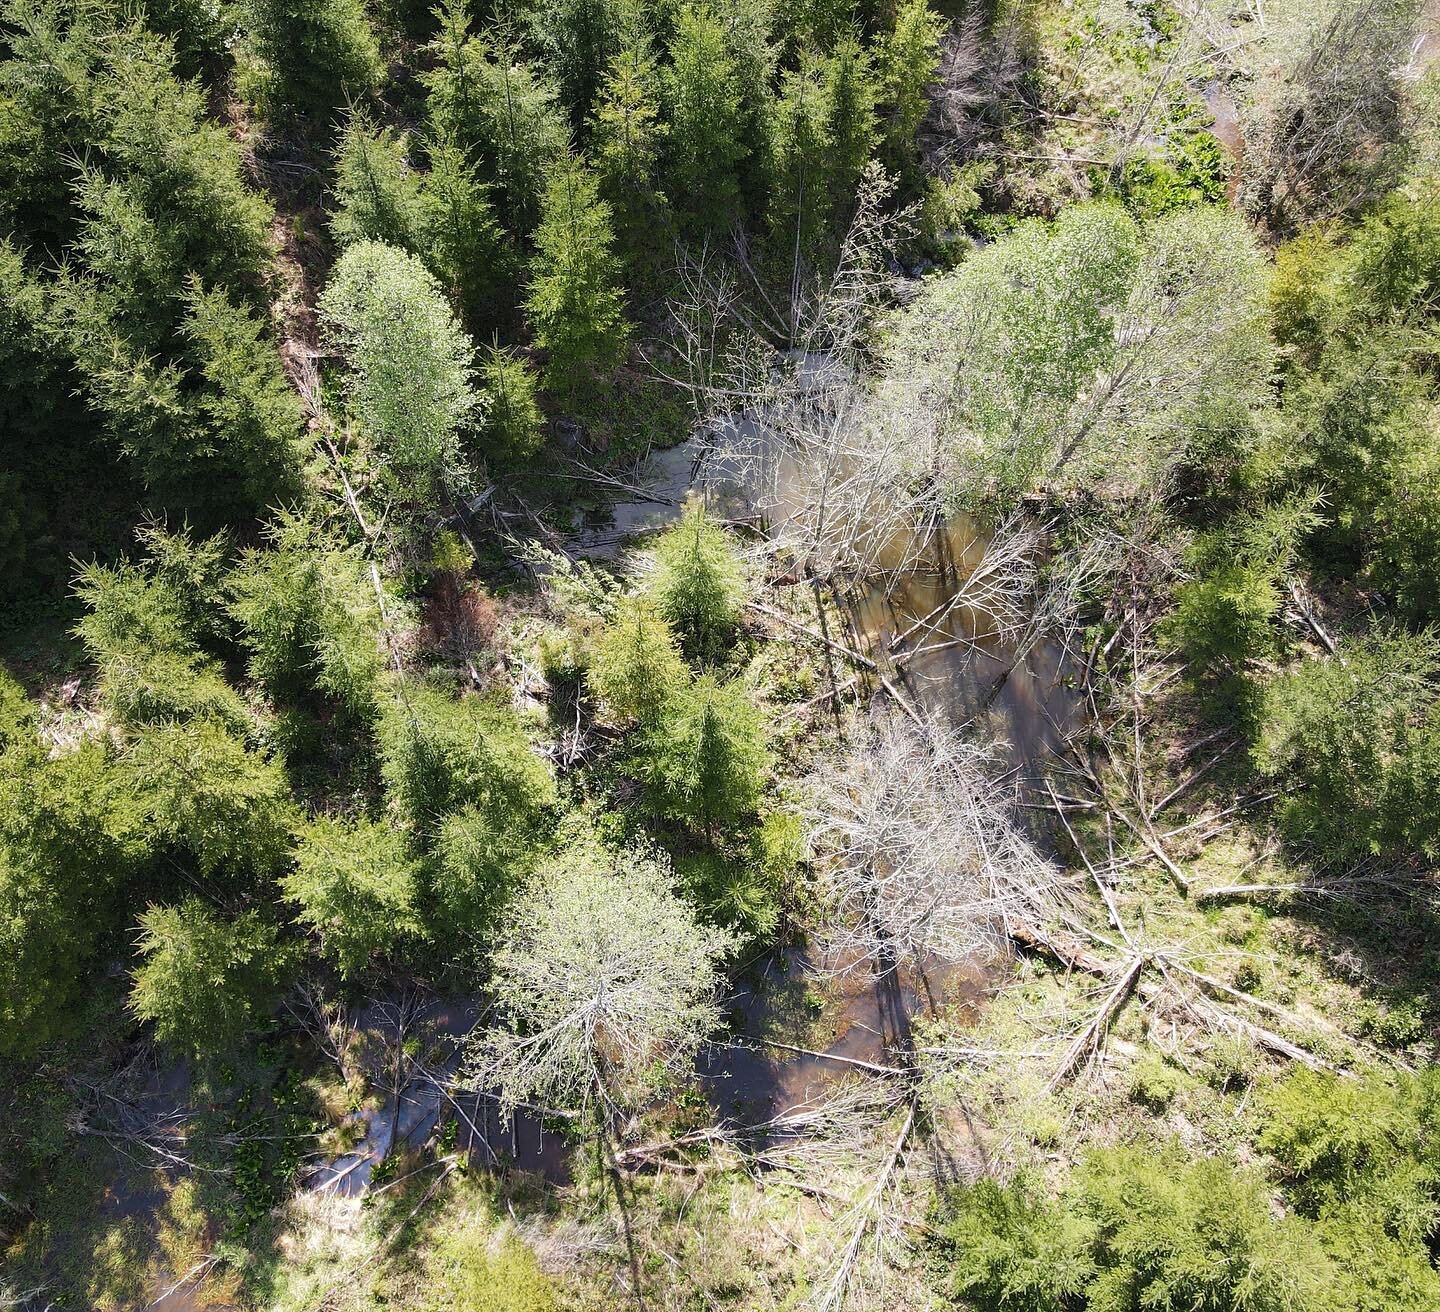 Using a drone, we got some great views of this complex of beaver dams along a small stream near North Plains, OR. The beavers have transformed a small, non-fish-bearing stream into a series of wetlands and ponds, benefiting amphibians, songbirds, and